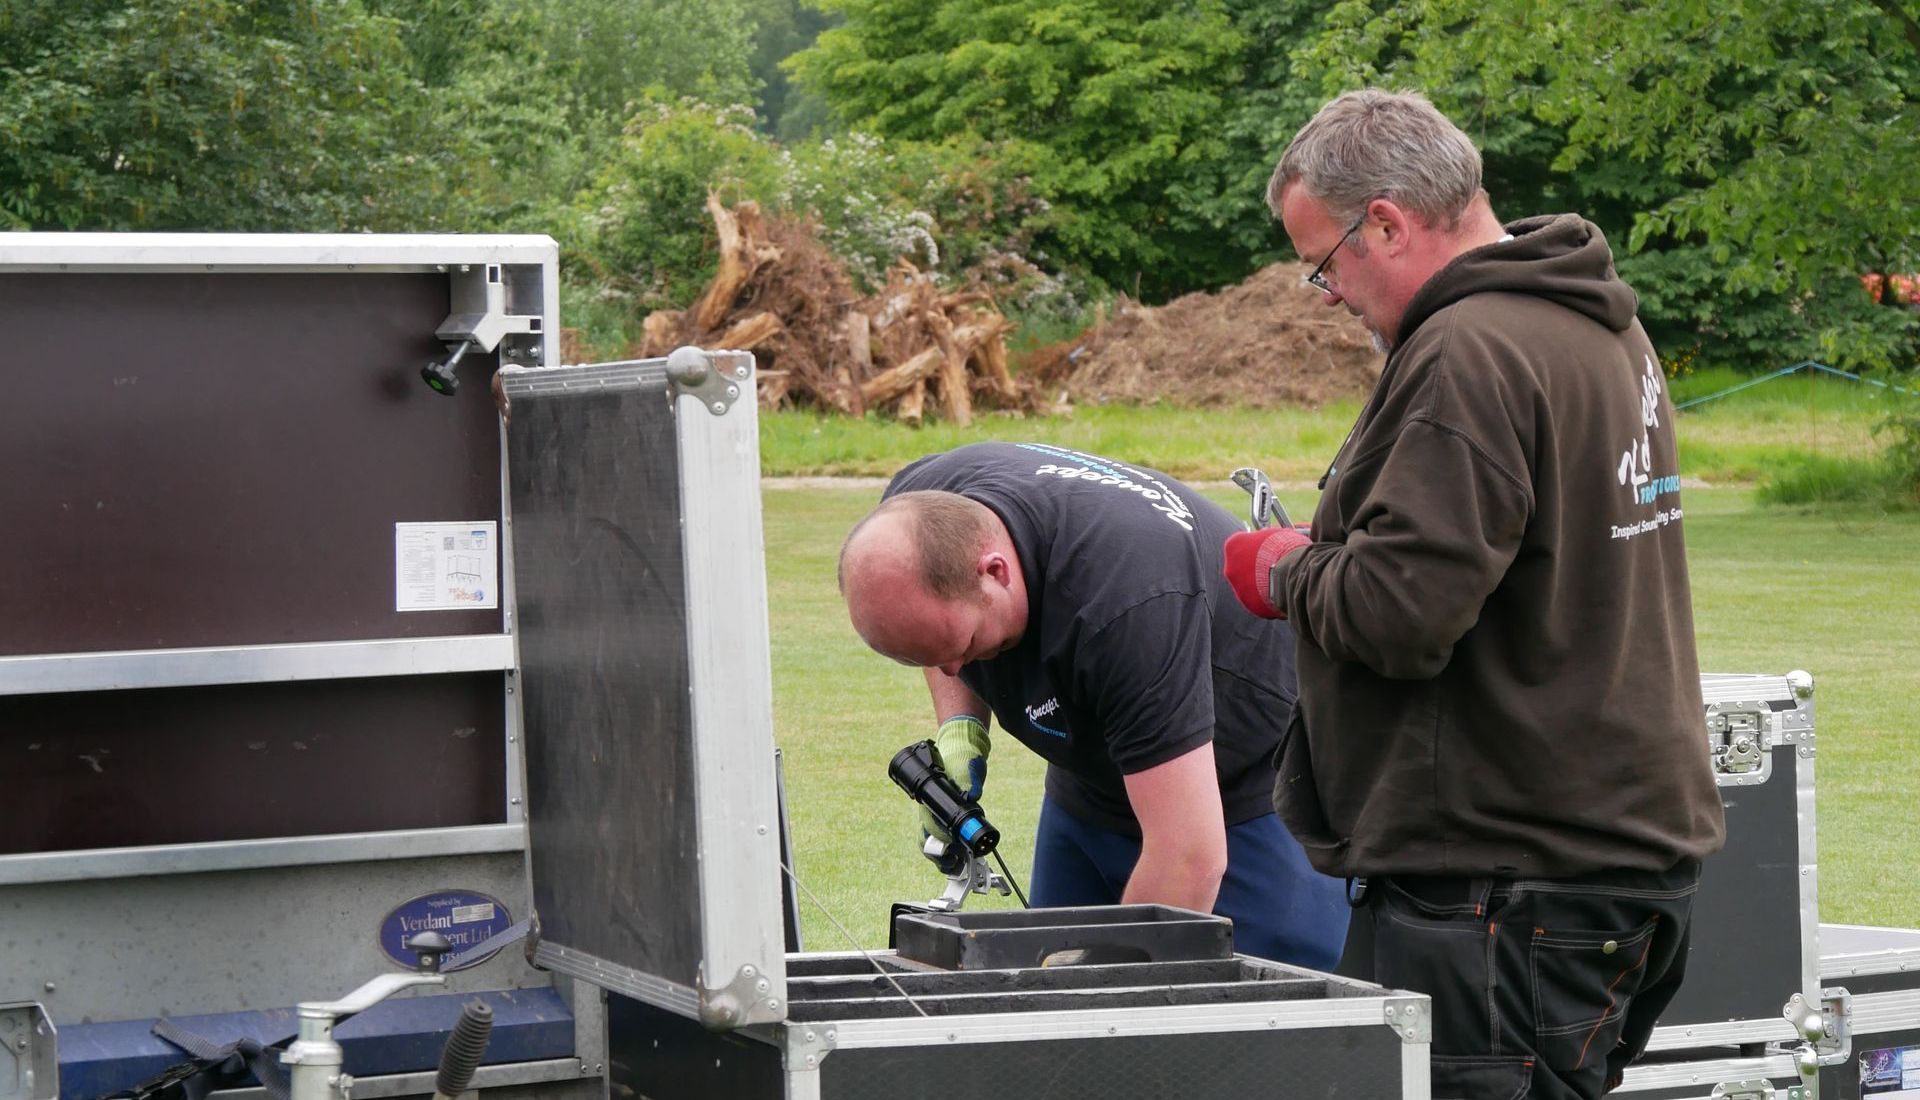 Two crew members on site, looking through flight cases